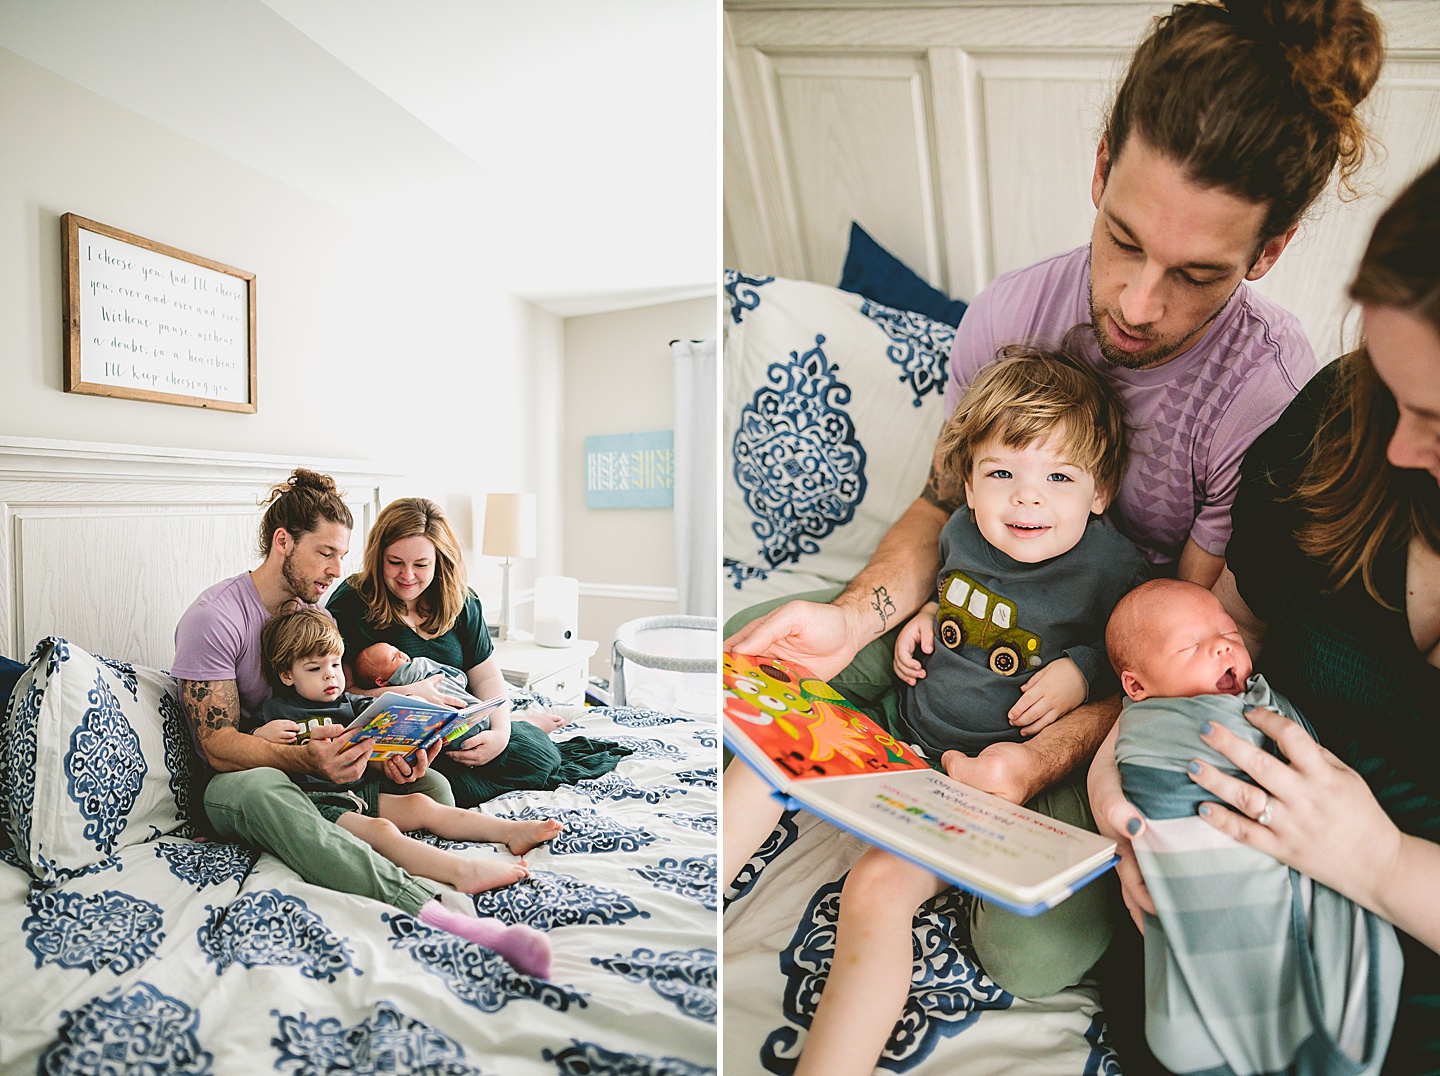 Family reading a book on the bed together